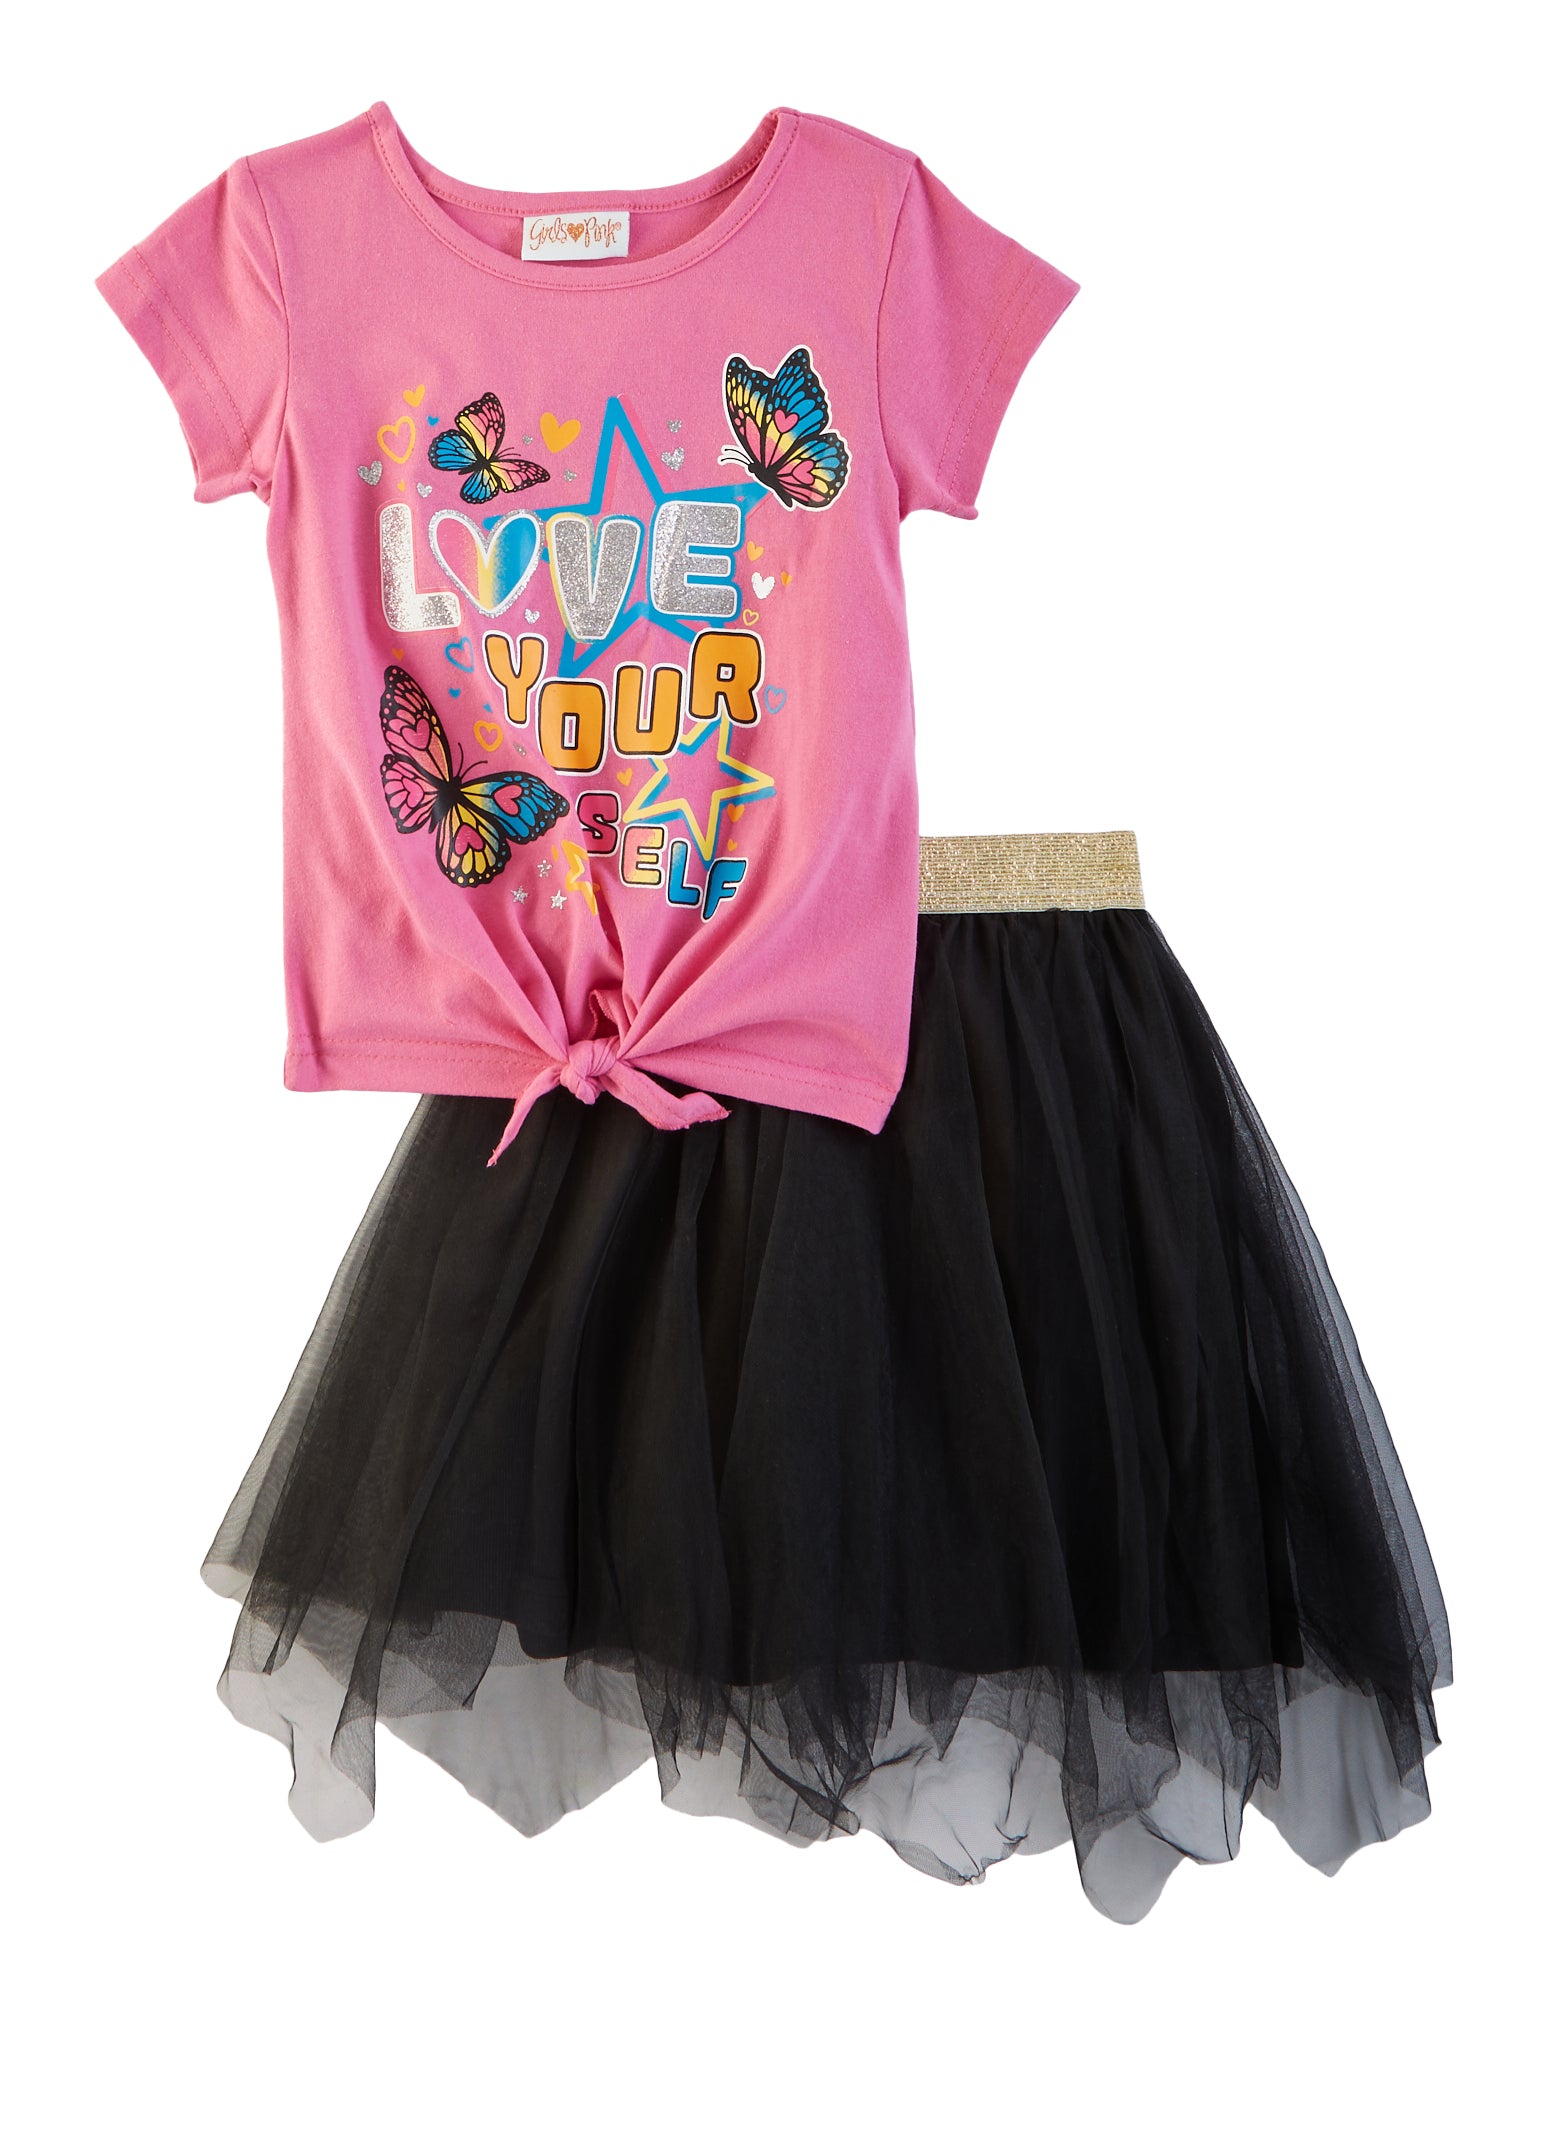 Little Girls Love Your Self Graphic Tee and Tutu Skirt, Pink,